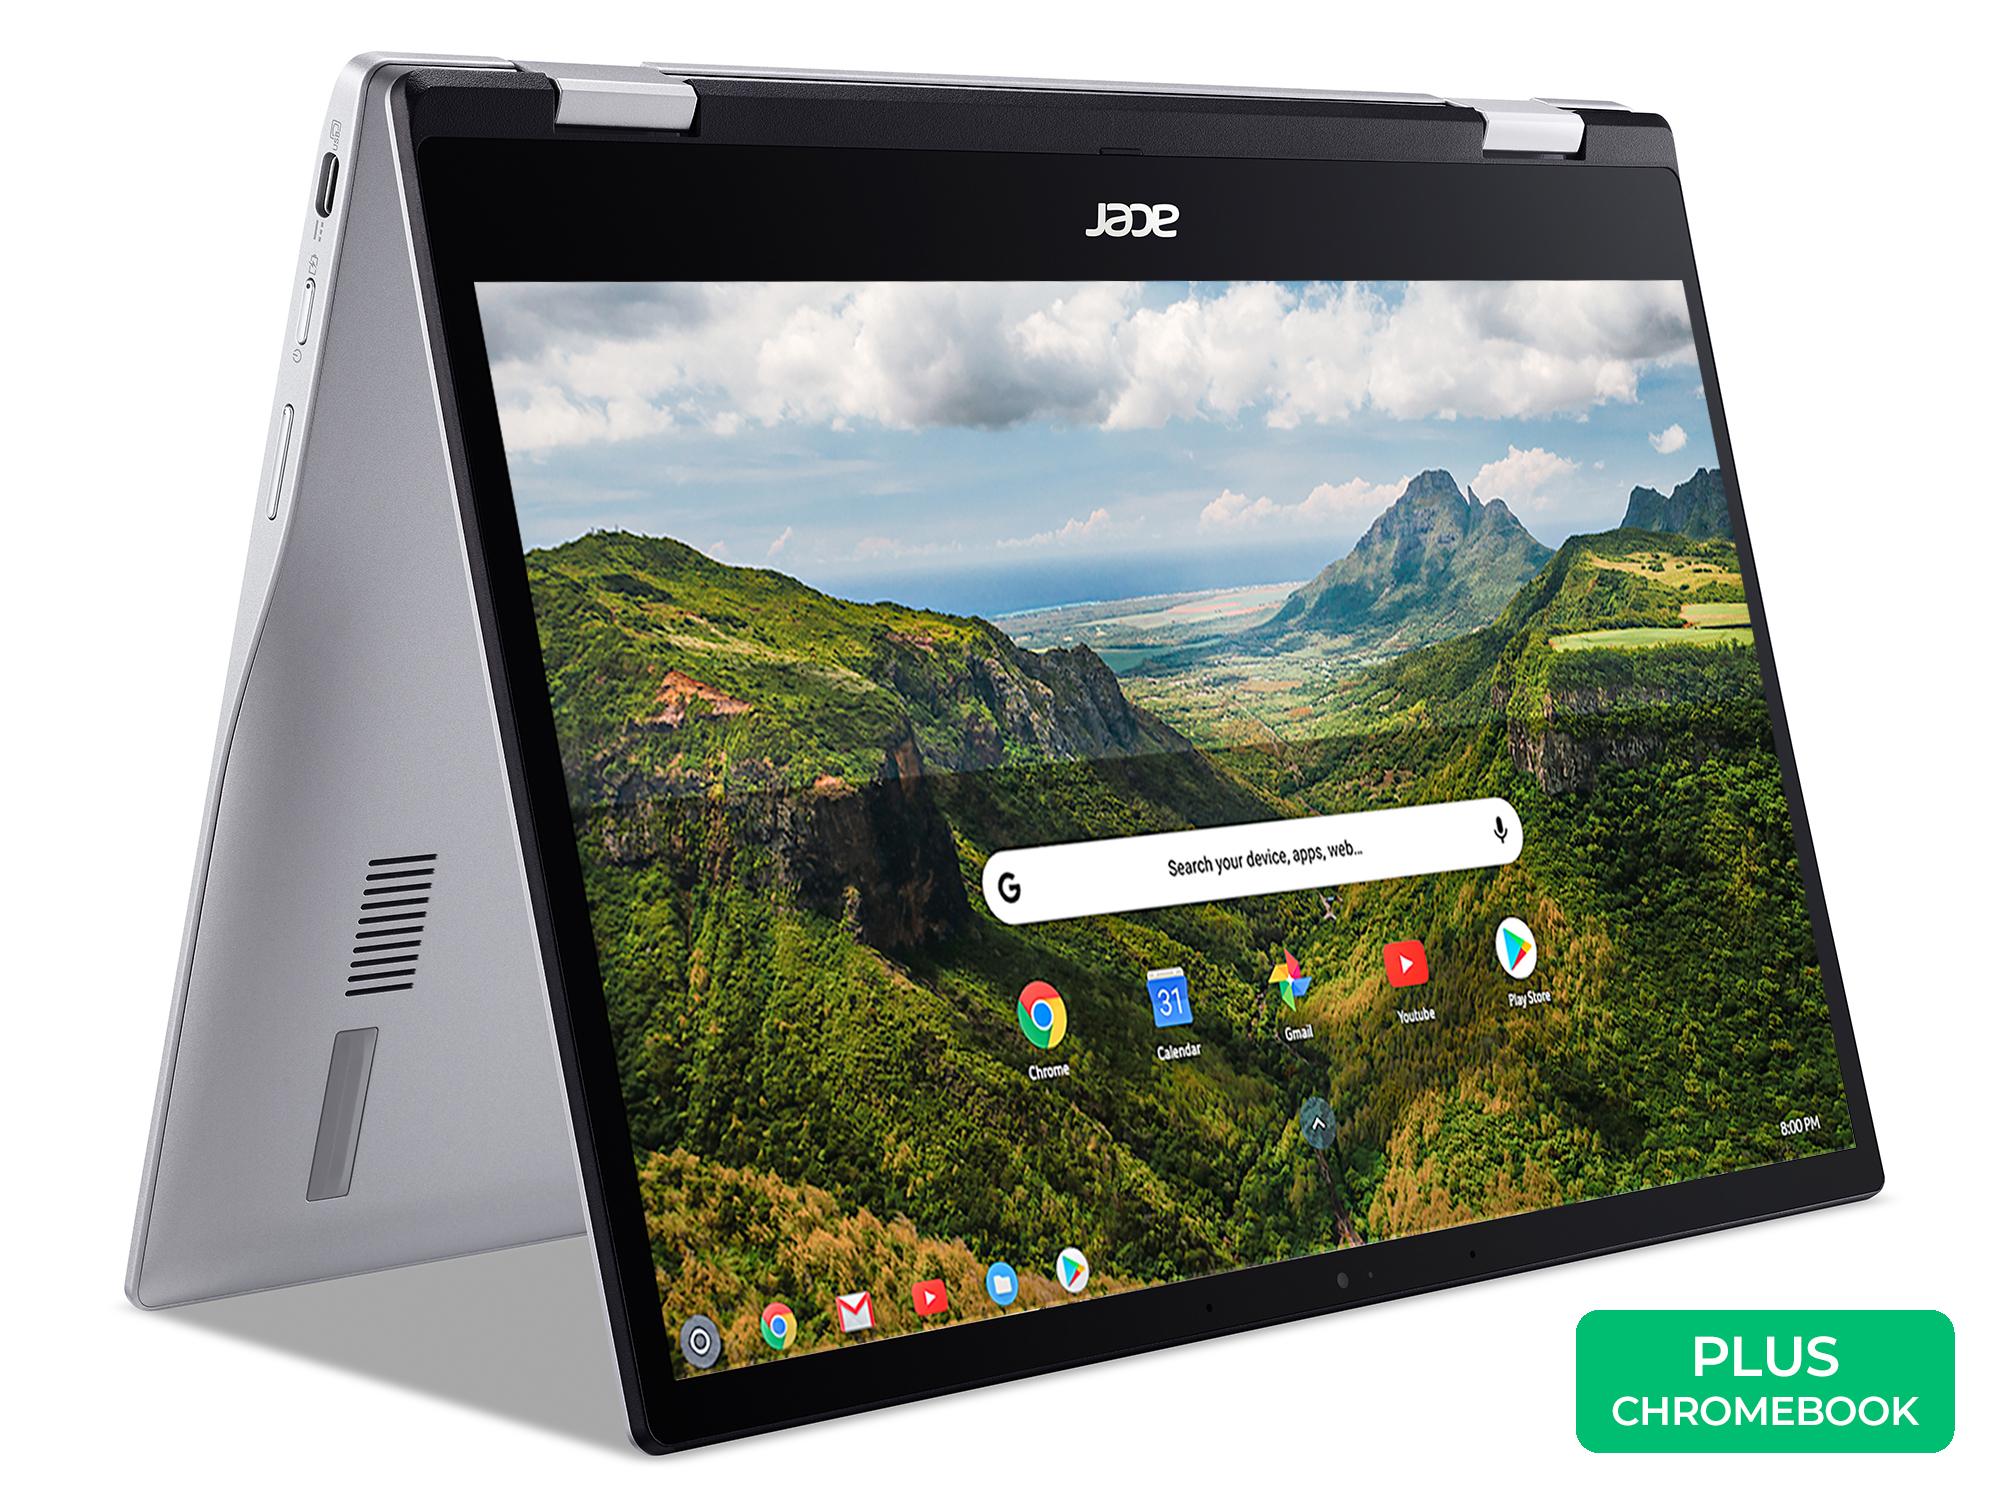 £399, ACER Spin 513 13.3inch 2 in 1 Chromebook - Qualcomm SC7180, 64 GB eMMC, Silver, Plus Chromebook, Chrome OS, Snapdragon 7c Compute Platform, RAM: 4 GB / Storage: 64 GB eMMC, Full HD touchscreen, Battery life: Up to 14 hours, 